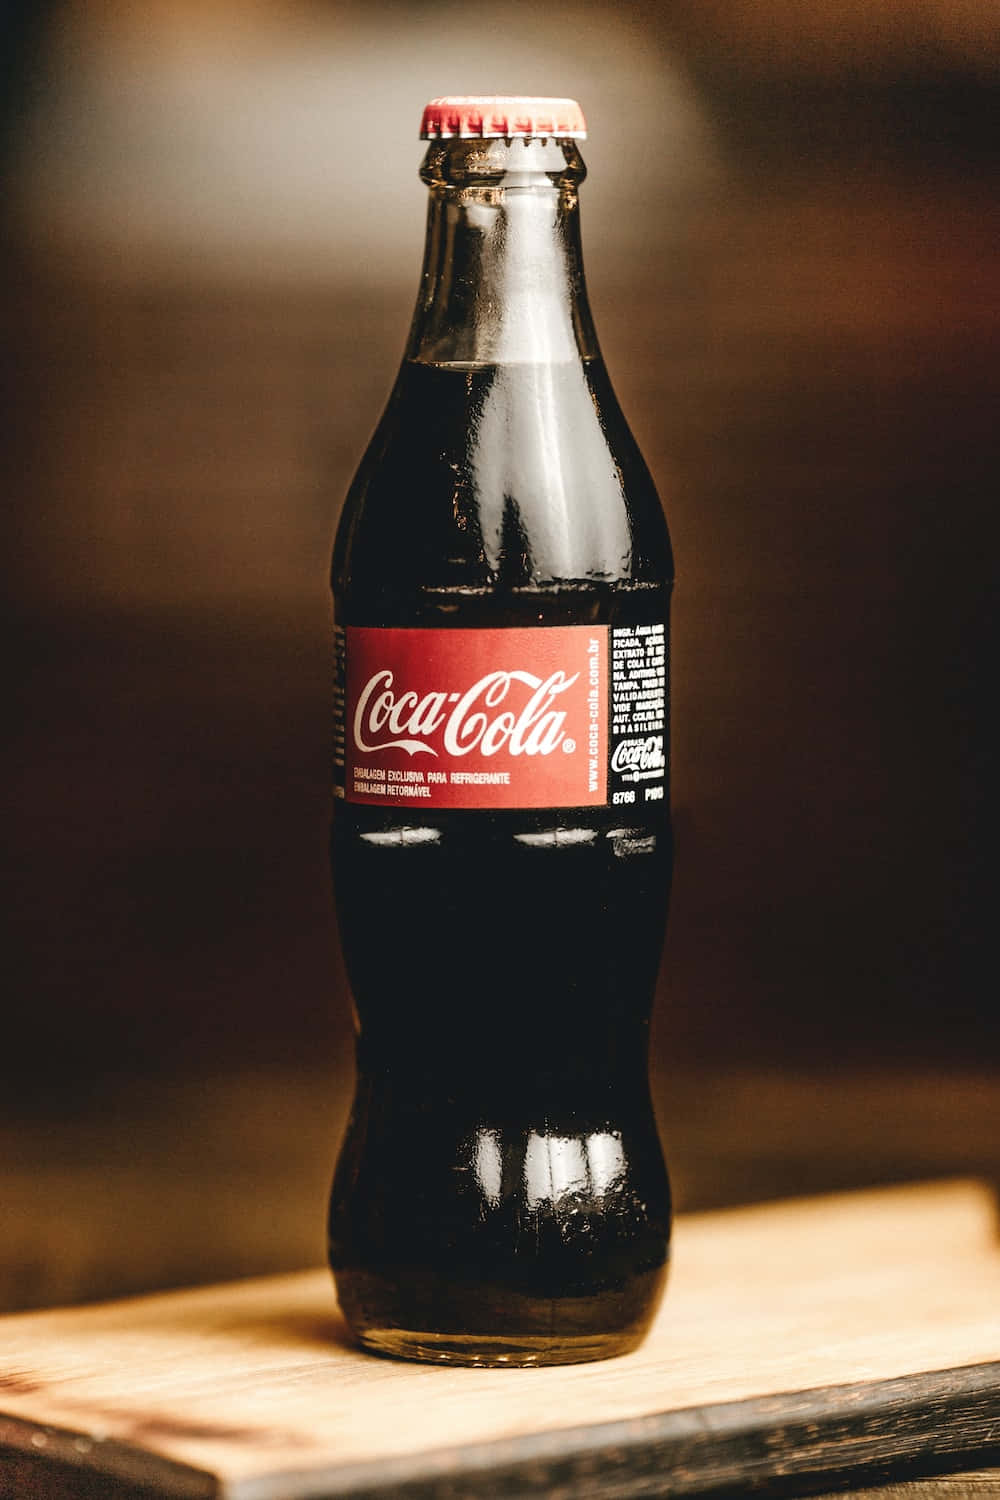 Refresh your day with an ice-cold Coca-Cola